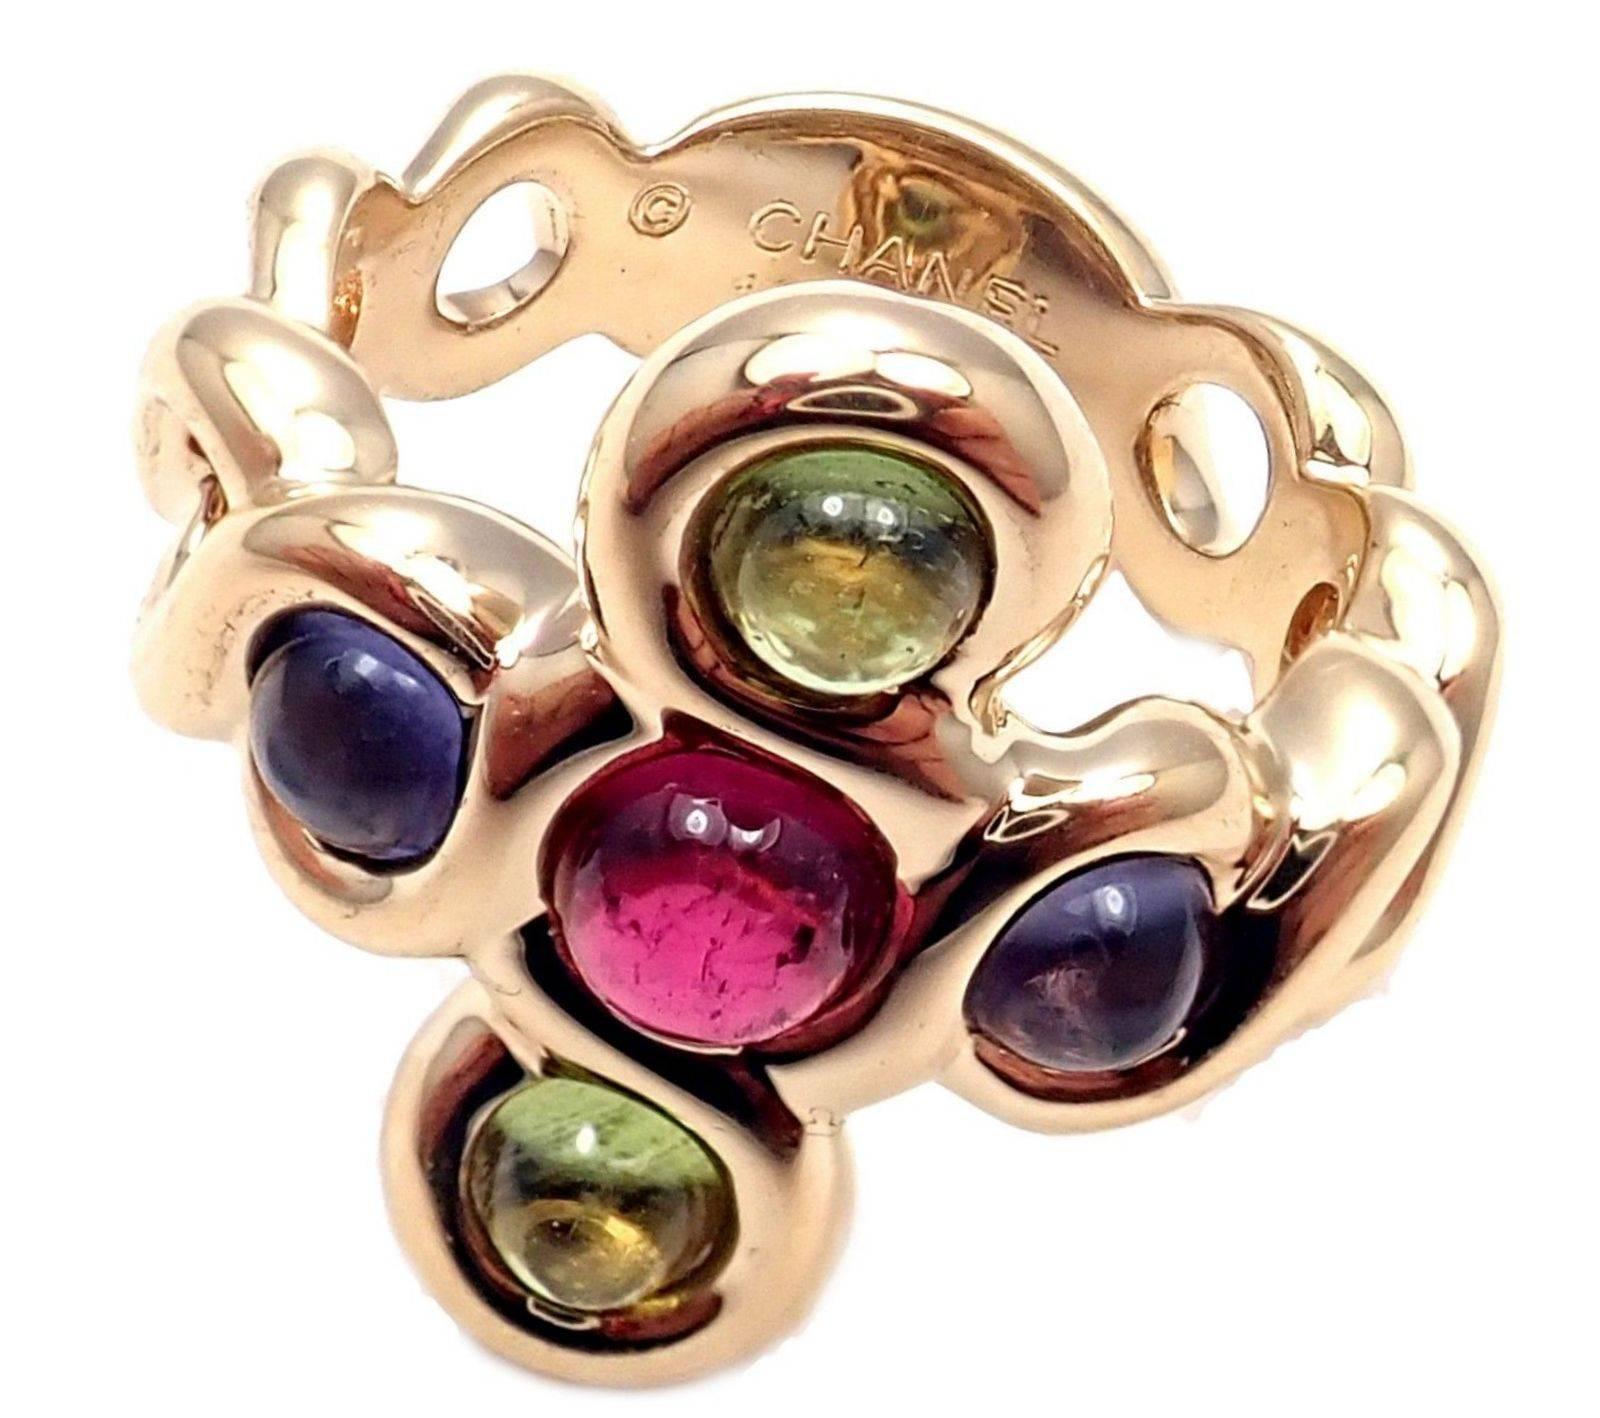 18k Yellow Gold Pink And Green Tourmaline Ring by Chanel. 
With 2 Round Amethyst stones 3.5mm
1 Round Pink Tourmaline stone 4mm
2 Round Green Tourmaline stones 3.5mm
Details: 
Ring Size: 4.5
Width at top: 19mm
Weight: 10.2 grams
Stamped Hallmarks: 